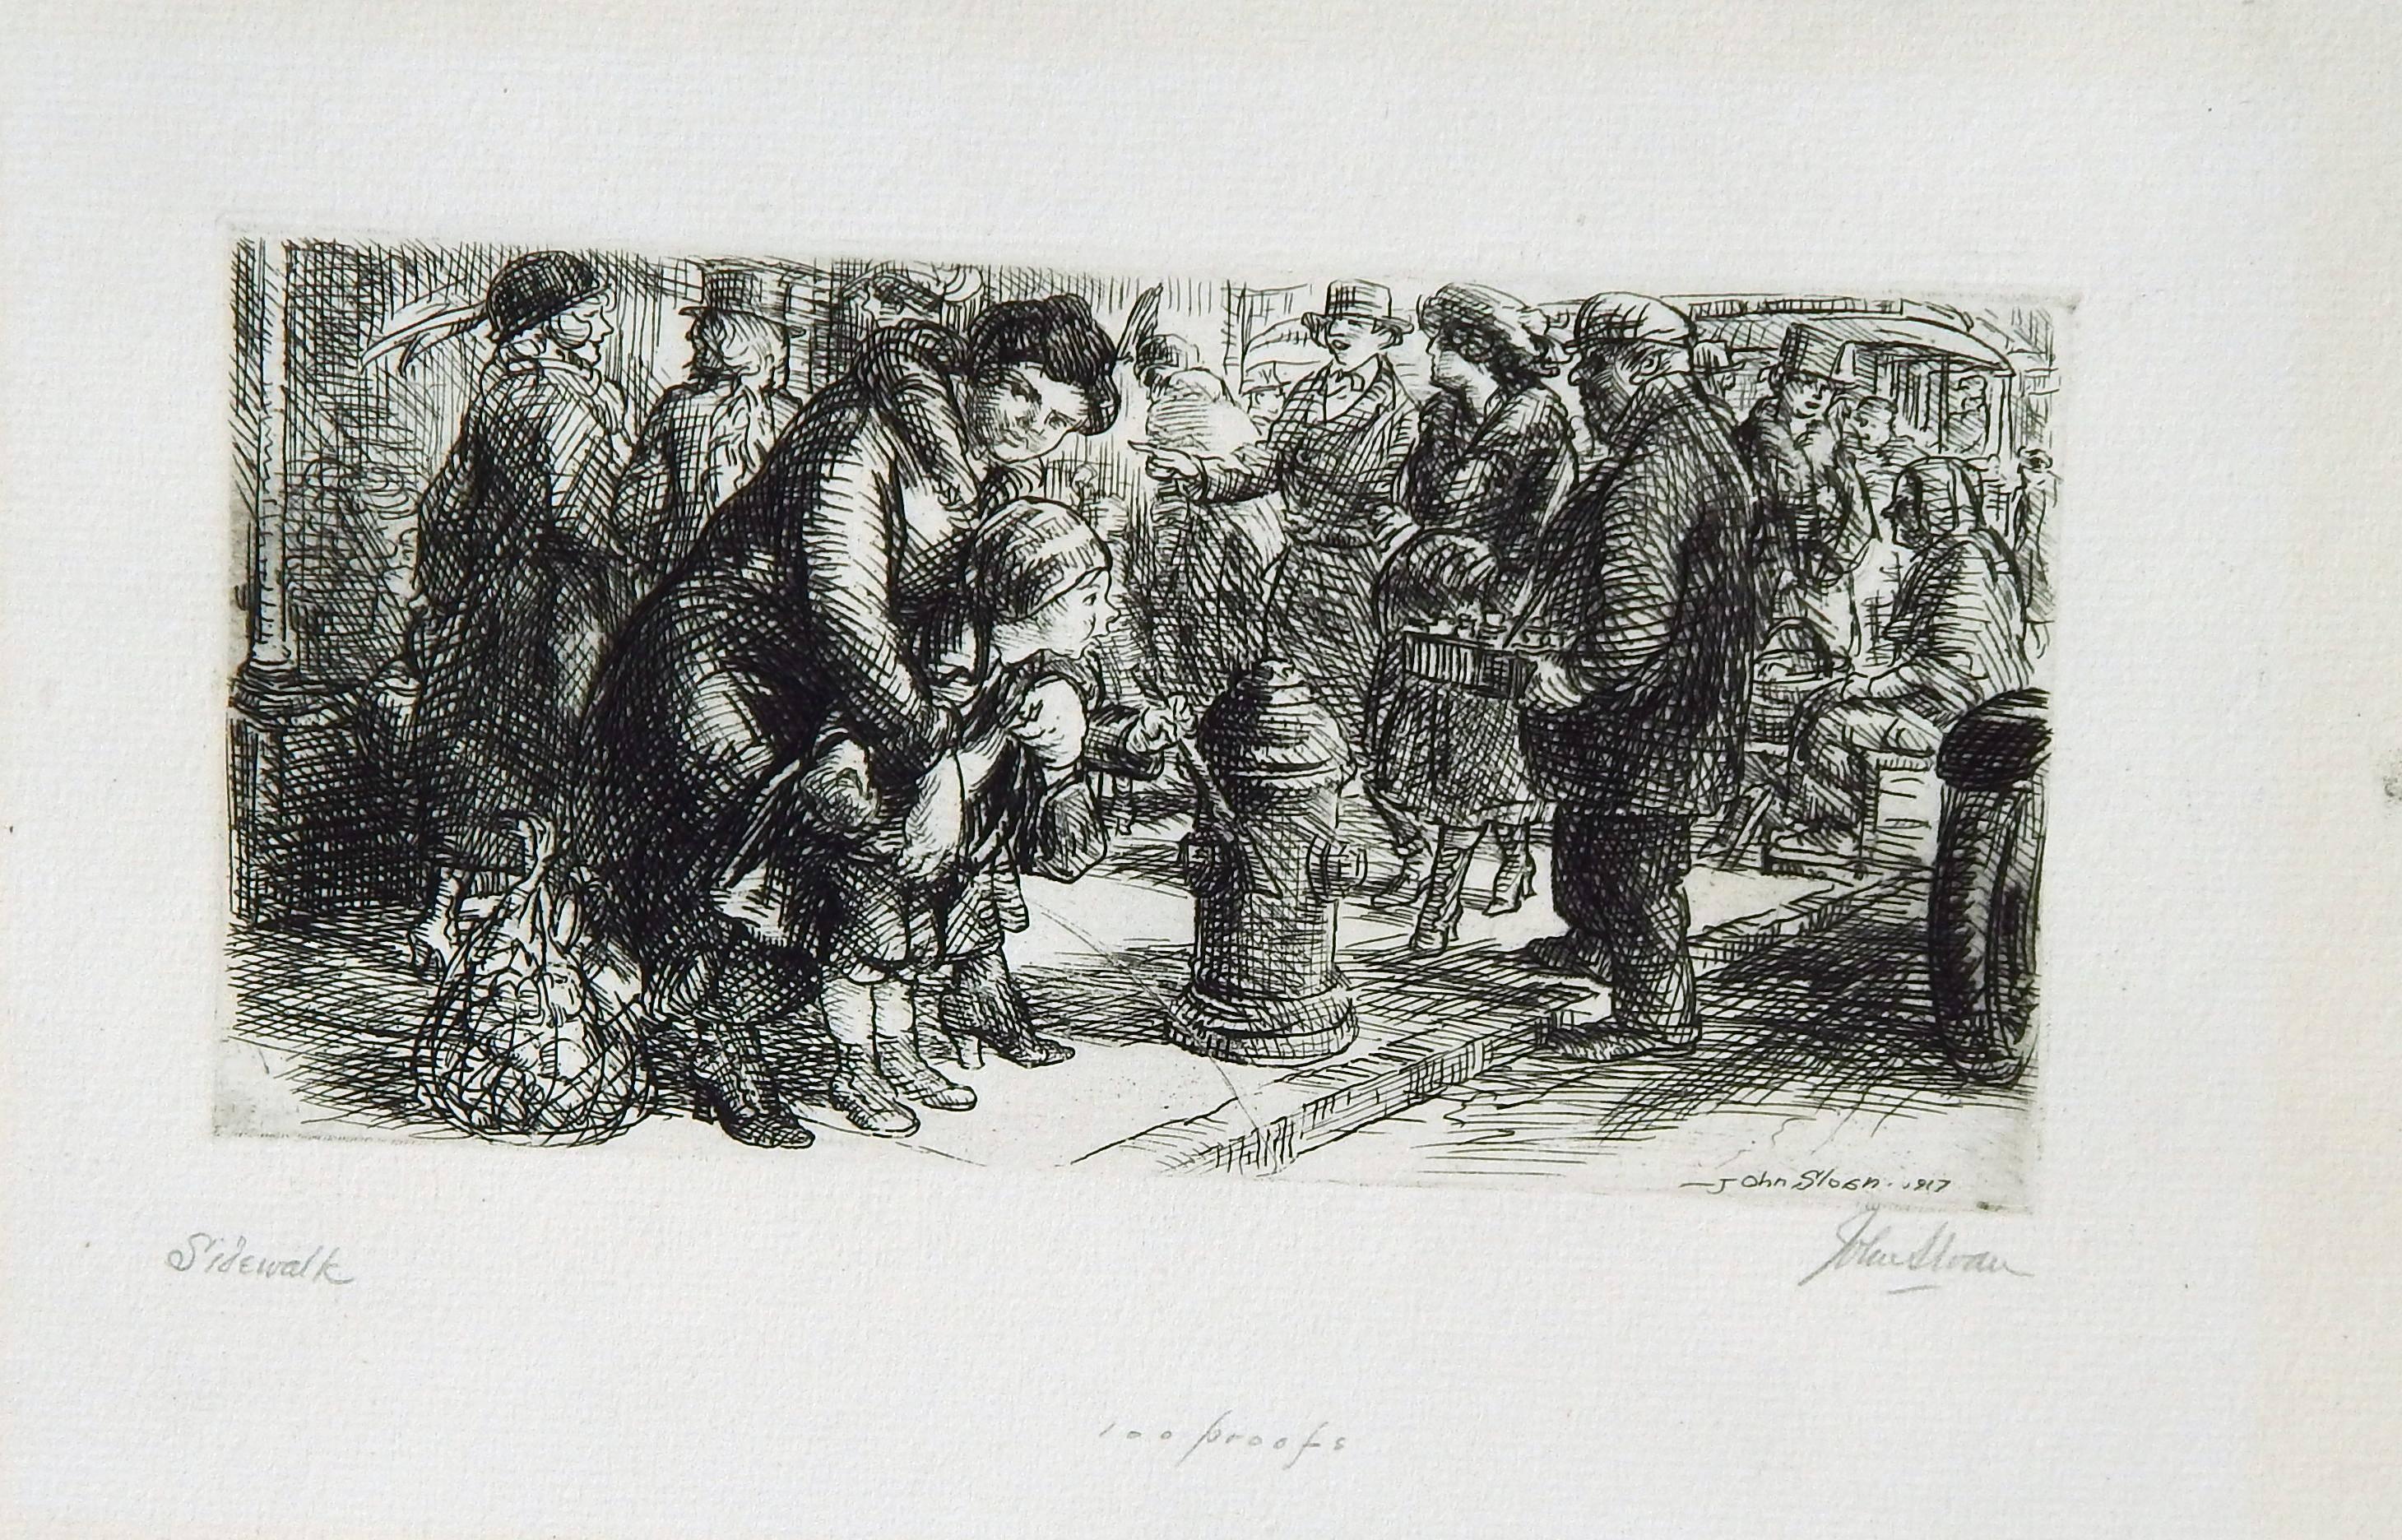 Original etching by John Sloan (1871-1951)
In good condition, framed. 
Depicts a mother helping her child pee in the street, 1917.
Image measures approx. 3 1/4